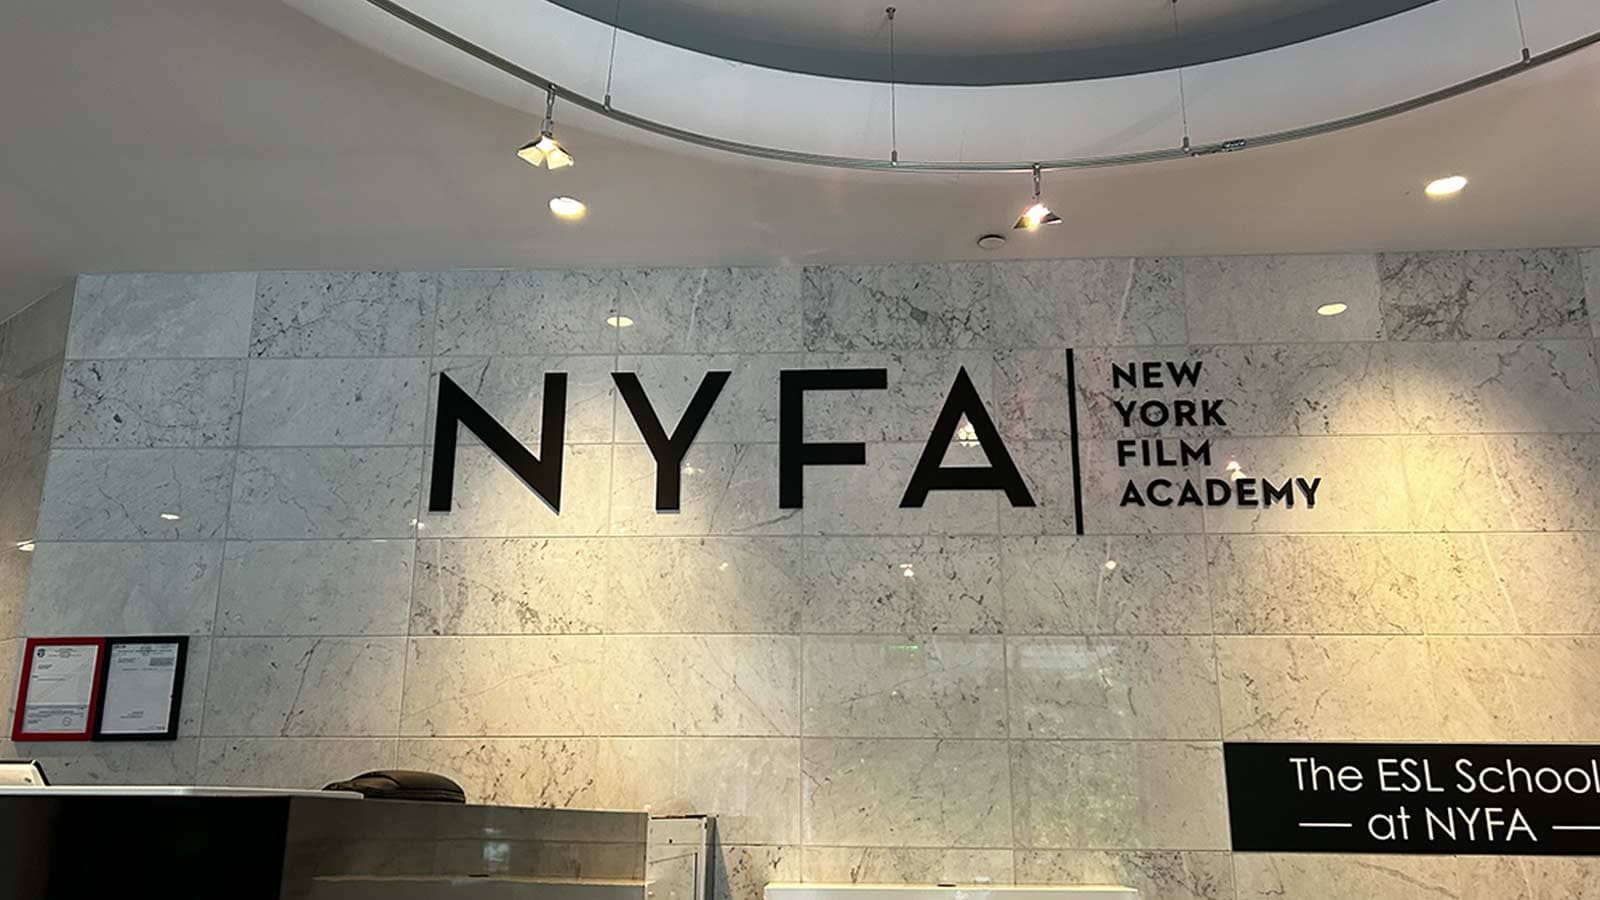 New York Film Academy interior sign attached to the wall